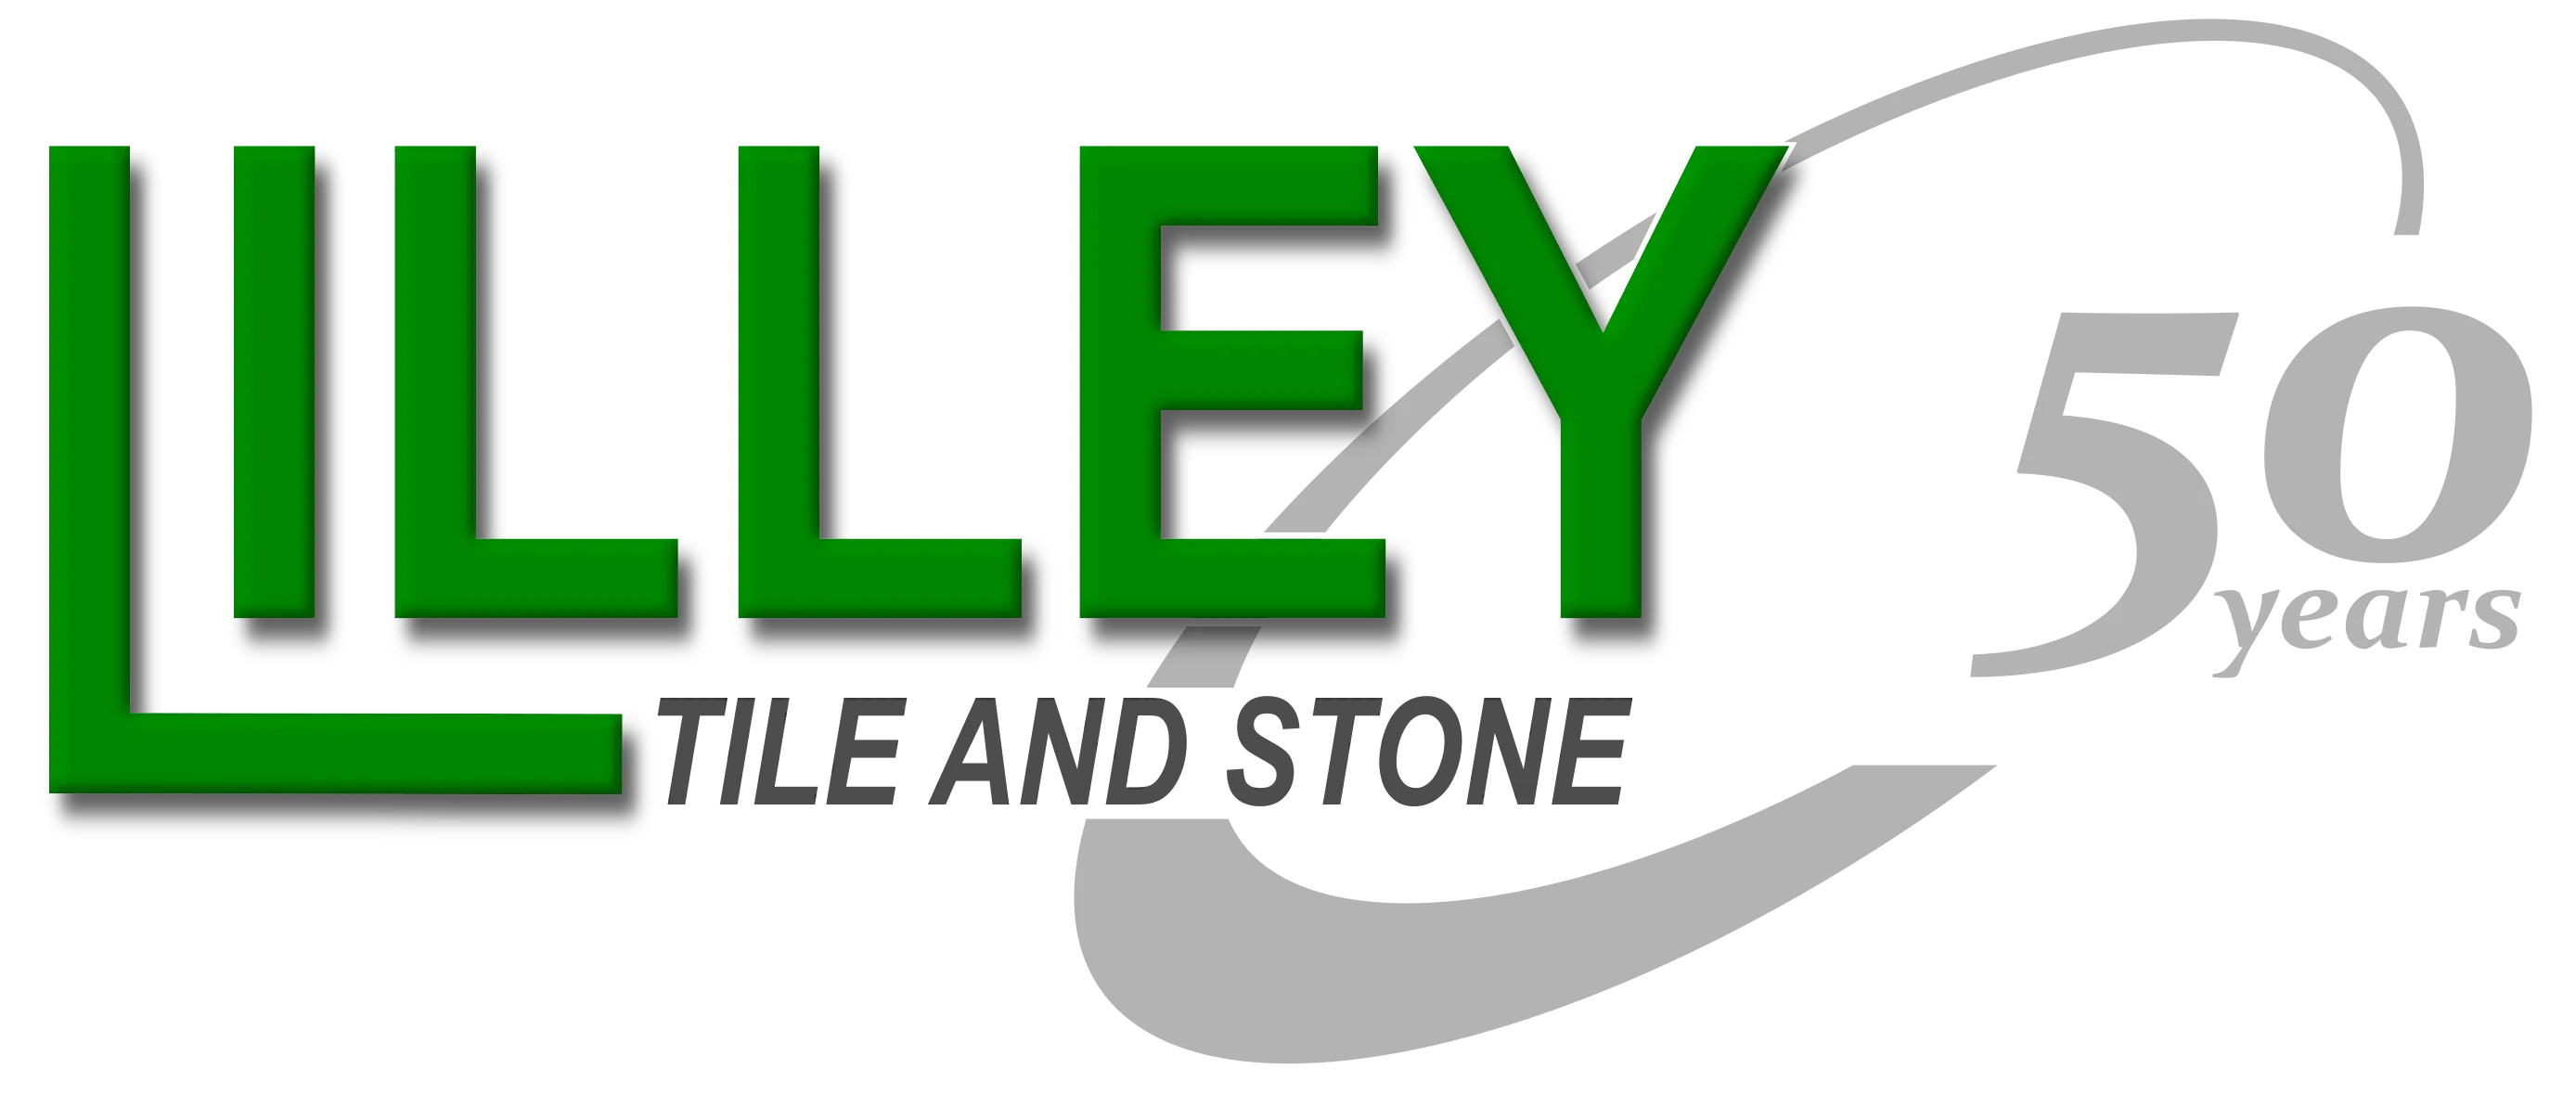  Lilley Tile And Stone Promo Codes